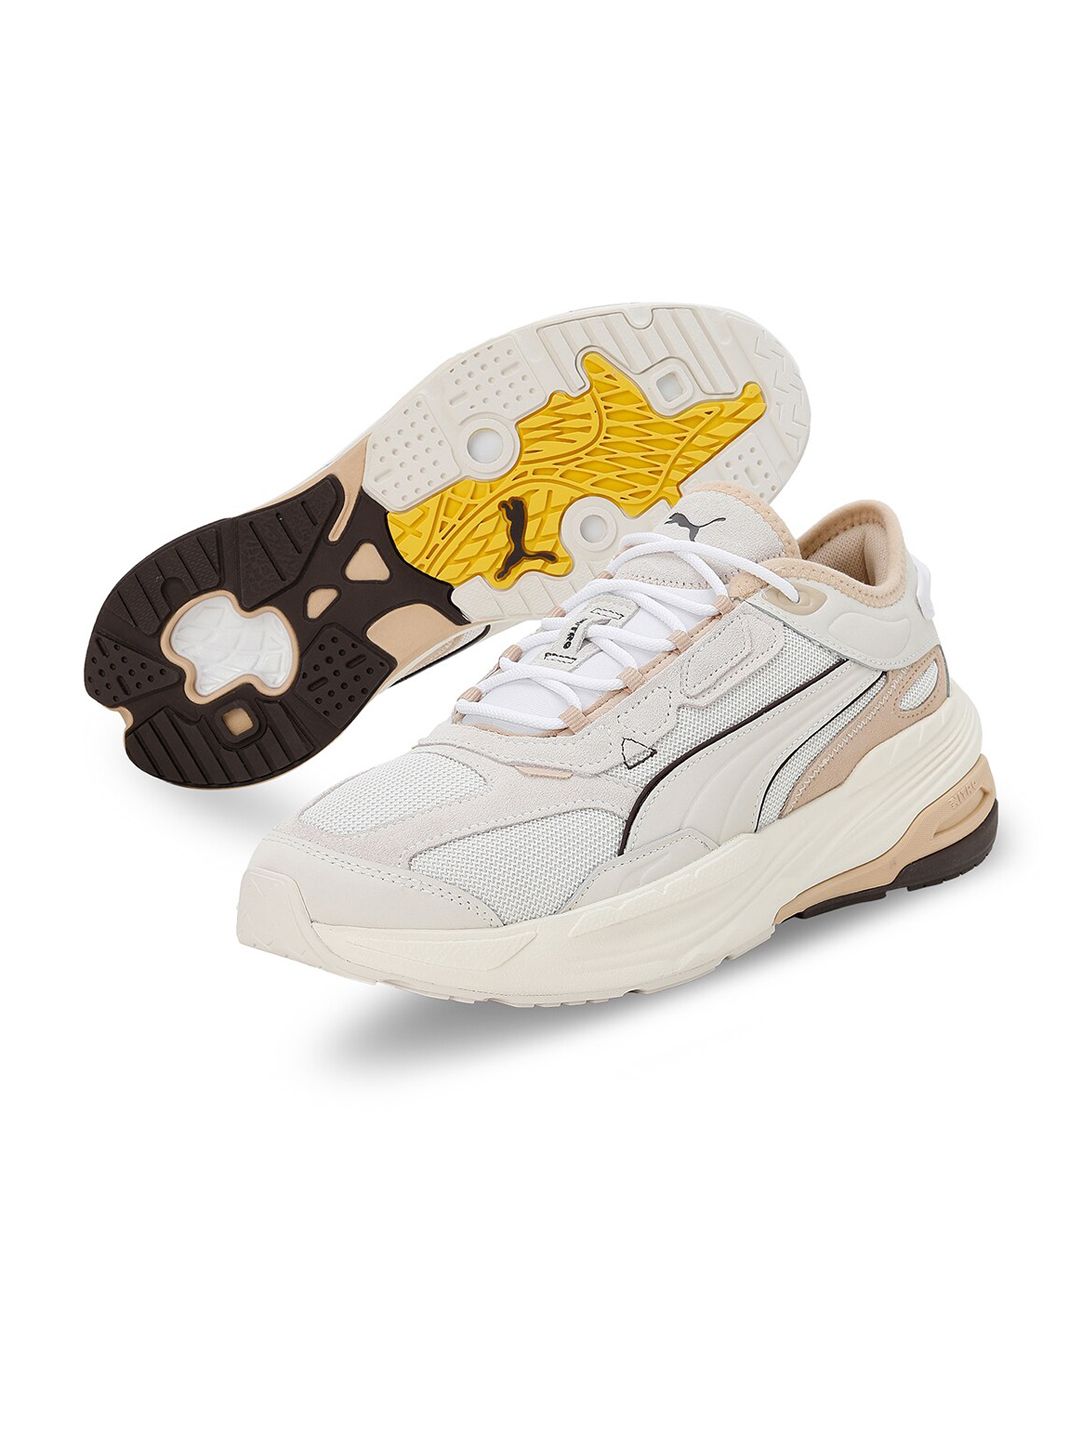 Puma Beige Woven Design Leather Extent Nitro Heritage Sneakers Price in India